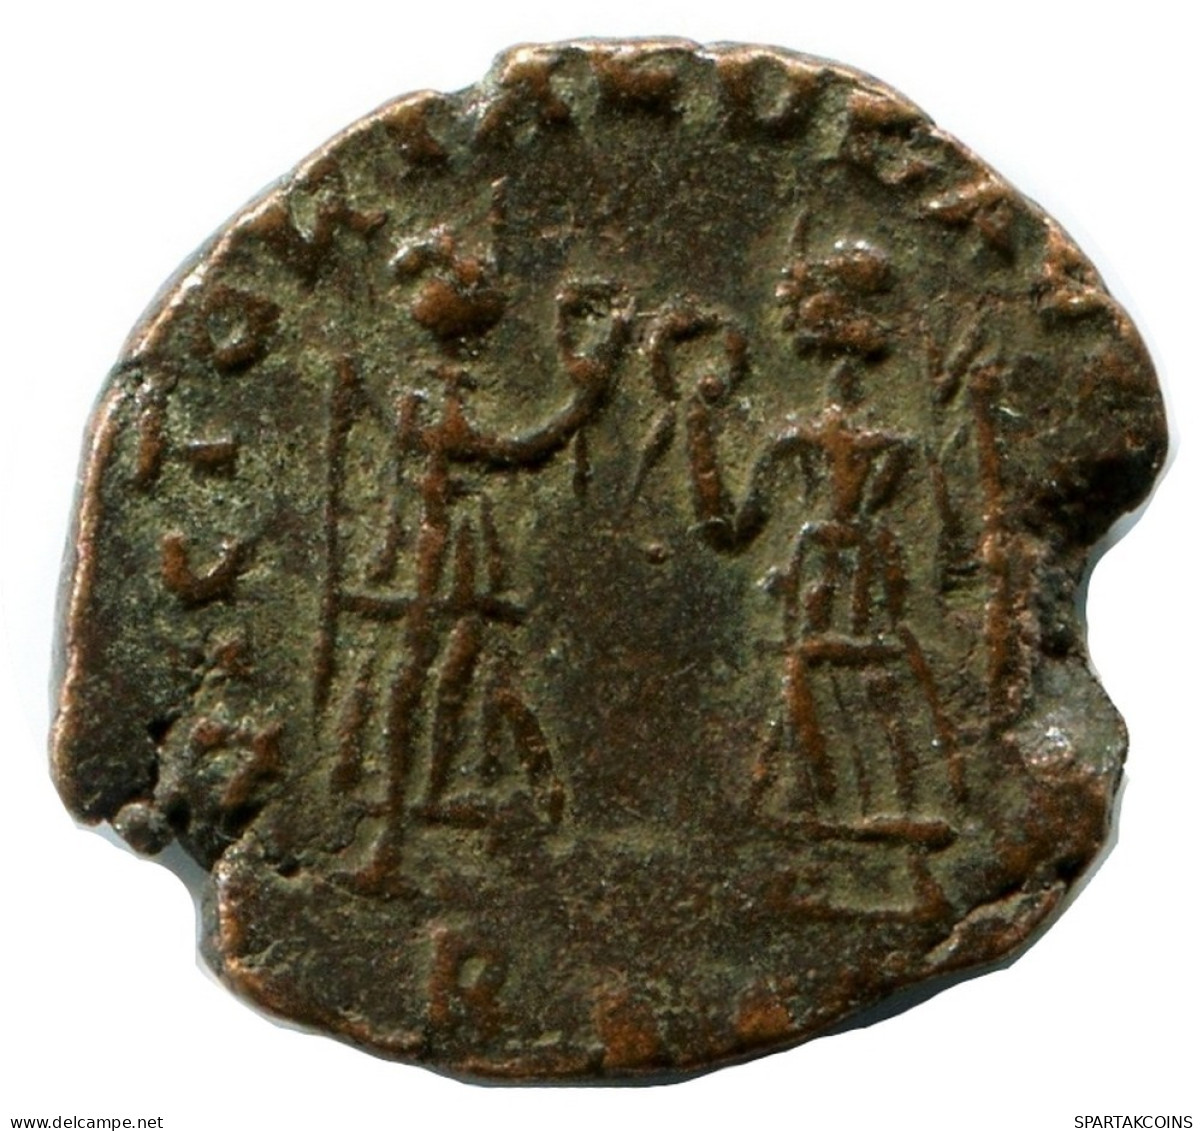 CONSTANS MINTED IN ROME ITALY FROM THE ROYAL ONTARIO MUSEUM #ANC11528.14.U.A - The Christian Empire (307 AD To 363 AD)